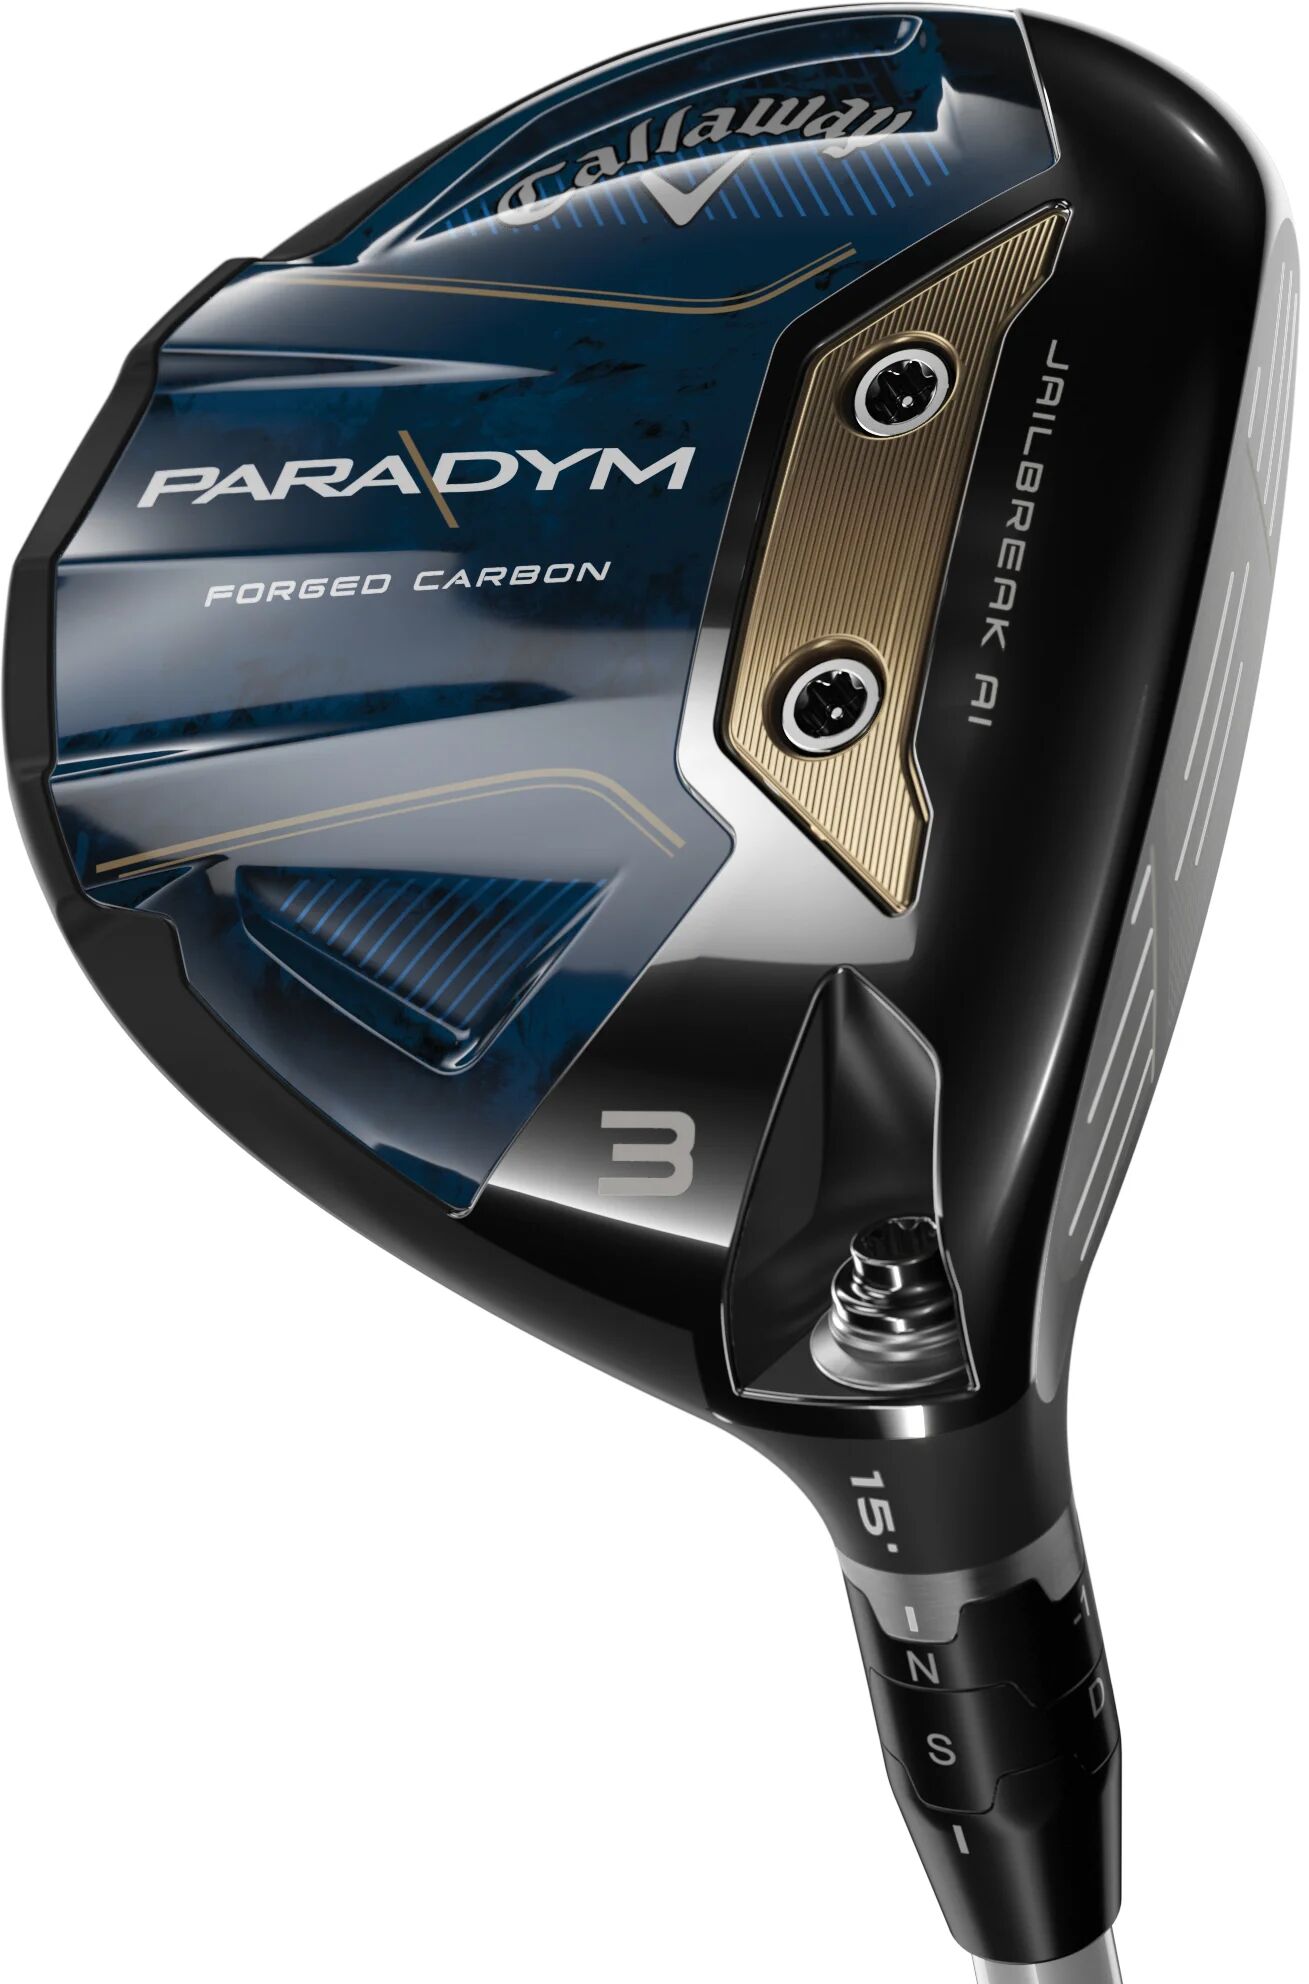 Callaway Paradym Fairway Woods - ON SALE - RIGHT - HZD SLV 60 6.0S - #11/27 - Golf Clubs